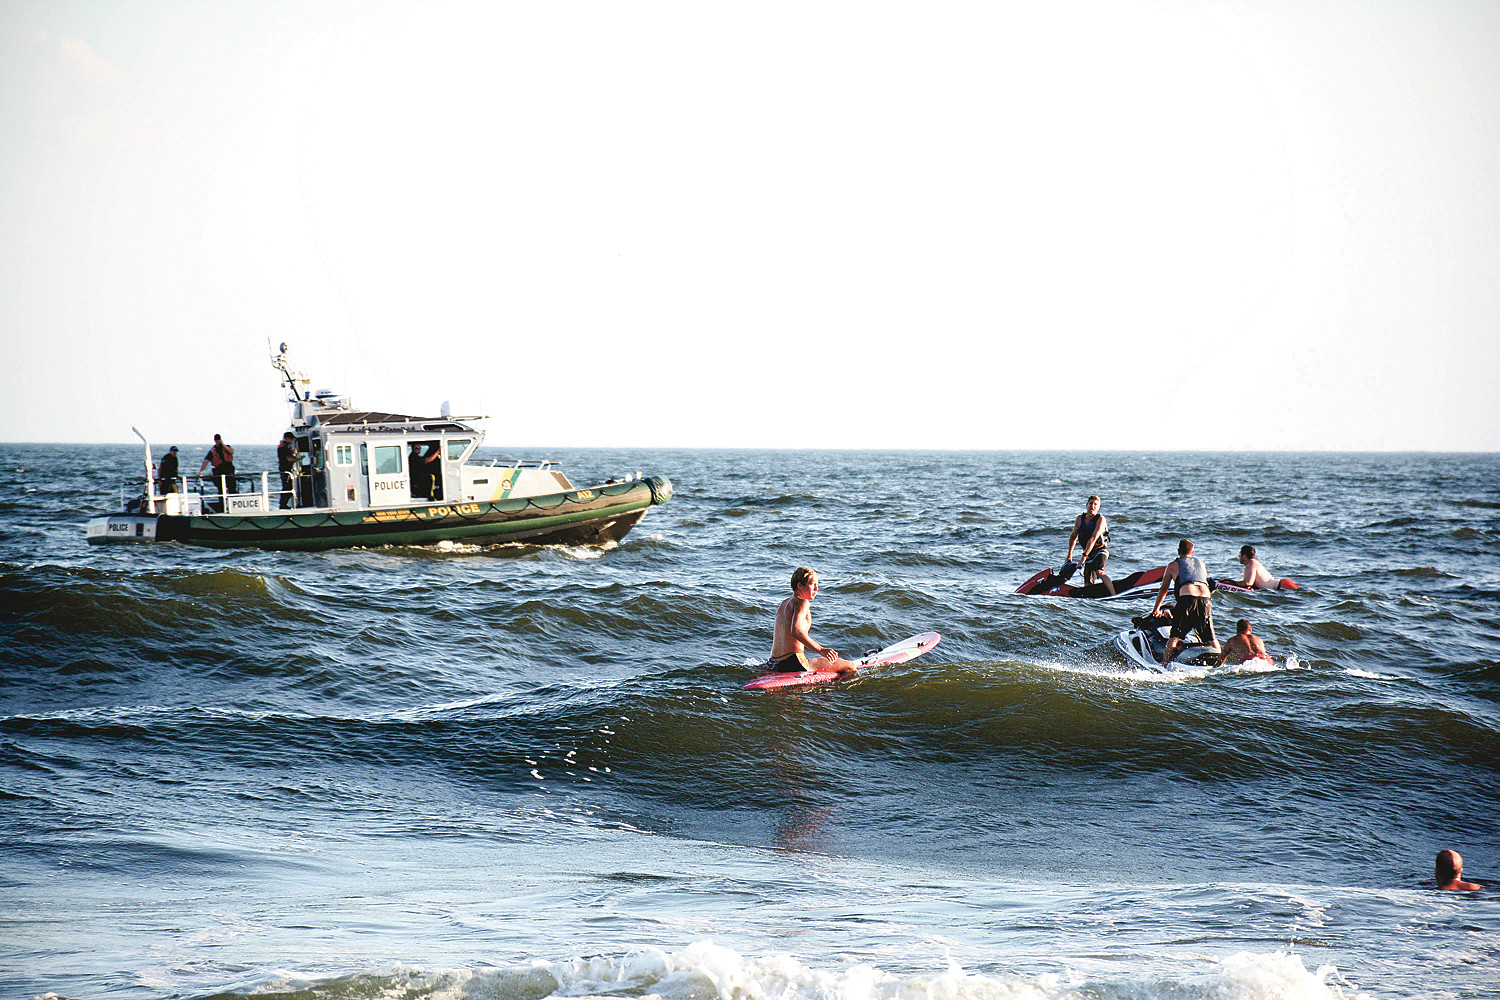 Firefighters and lifeguards used personal watercraft and surfboards during the search.